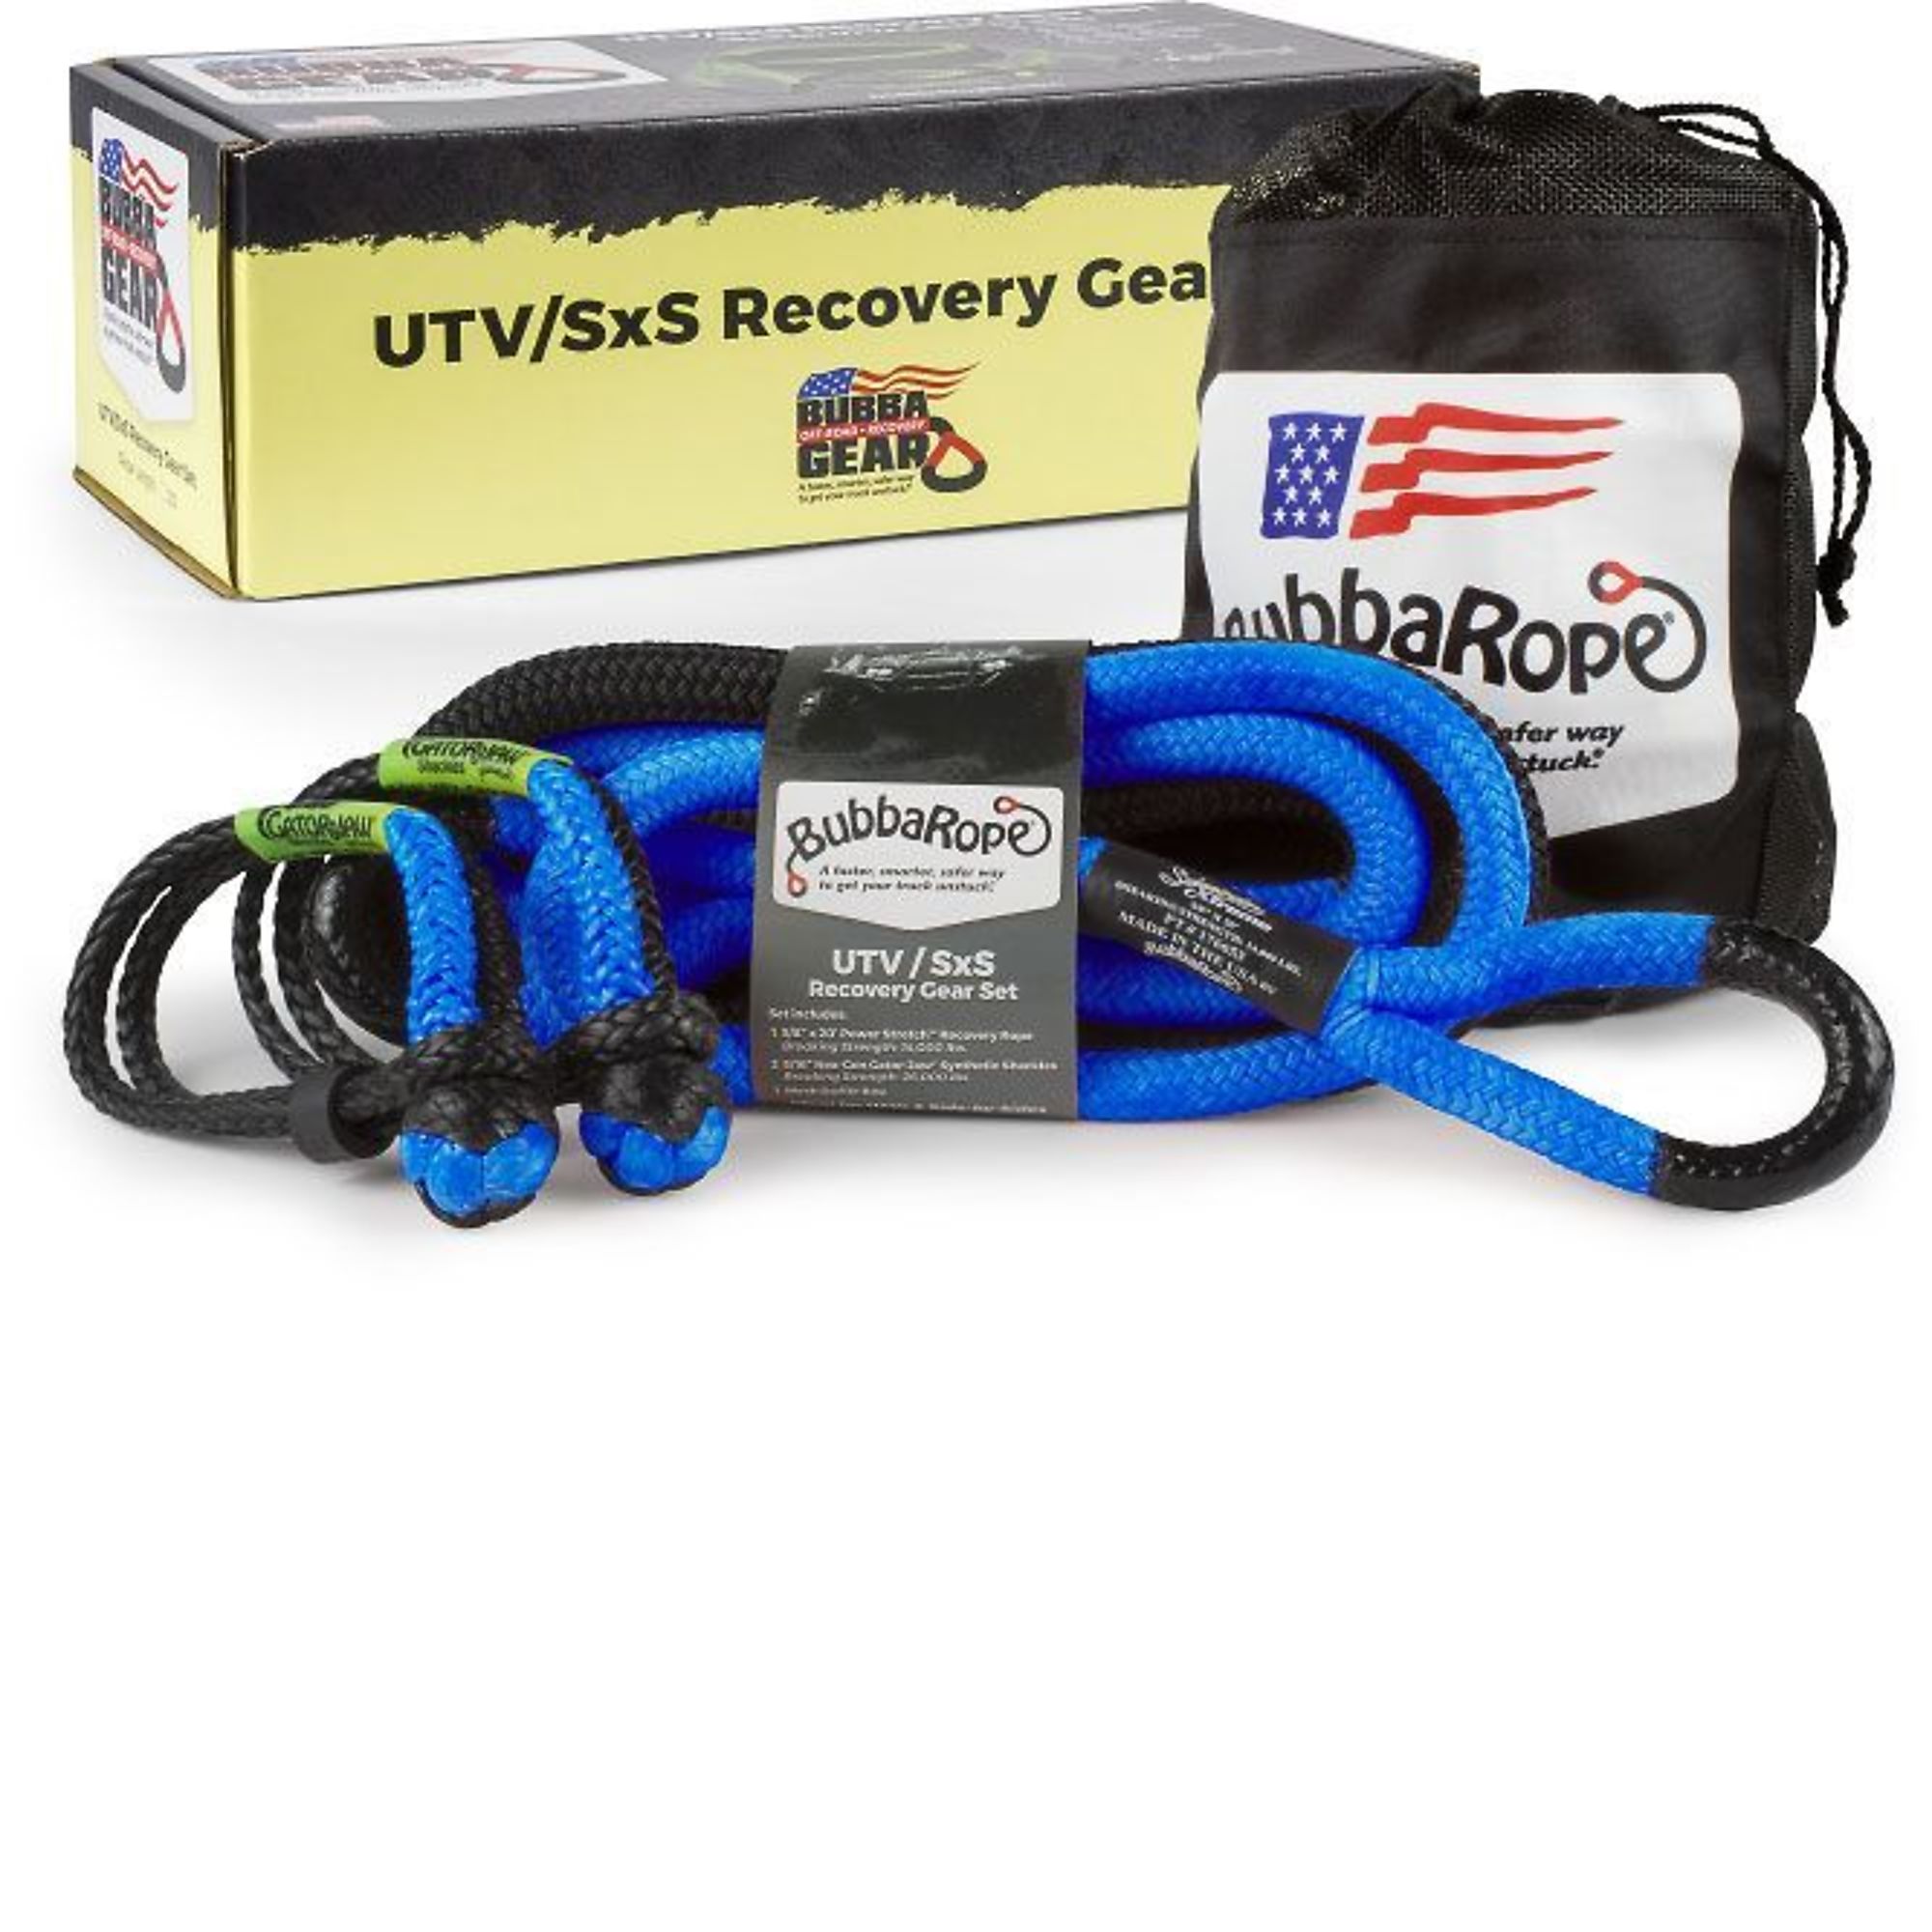 Bubba Rope, safely extract ATVs, UTVs, side-by-sides, Length 240 in, Material HMPE, Model 176653BL